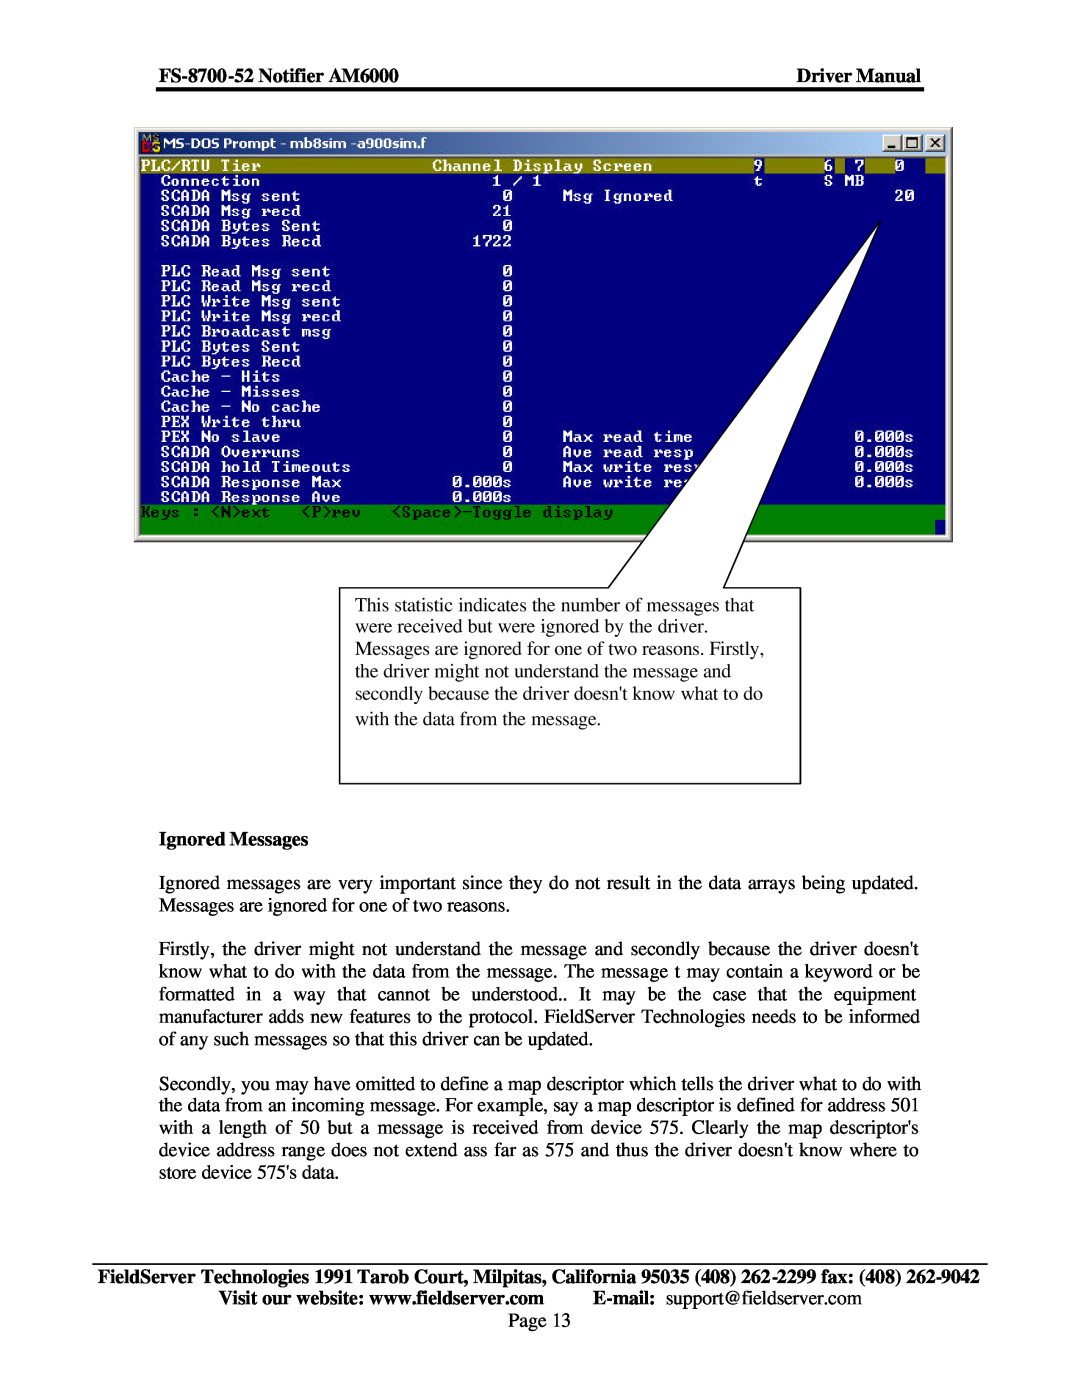 FieldServer instruction manual Ignored Messages, FS-8700-52 Notifier AM6000, Driver Manual 